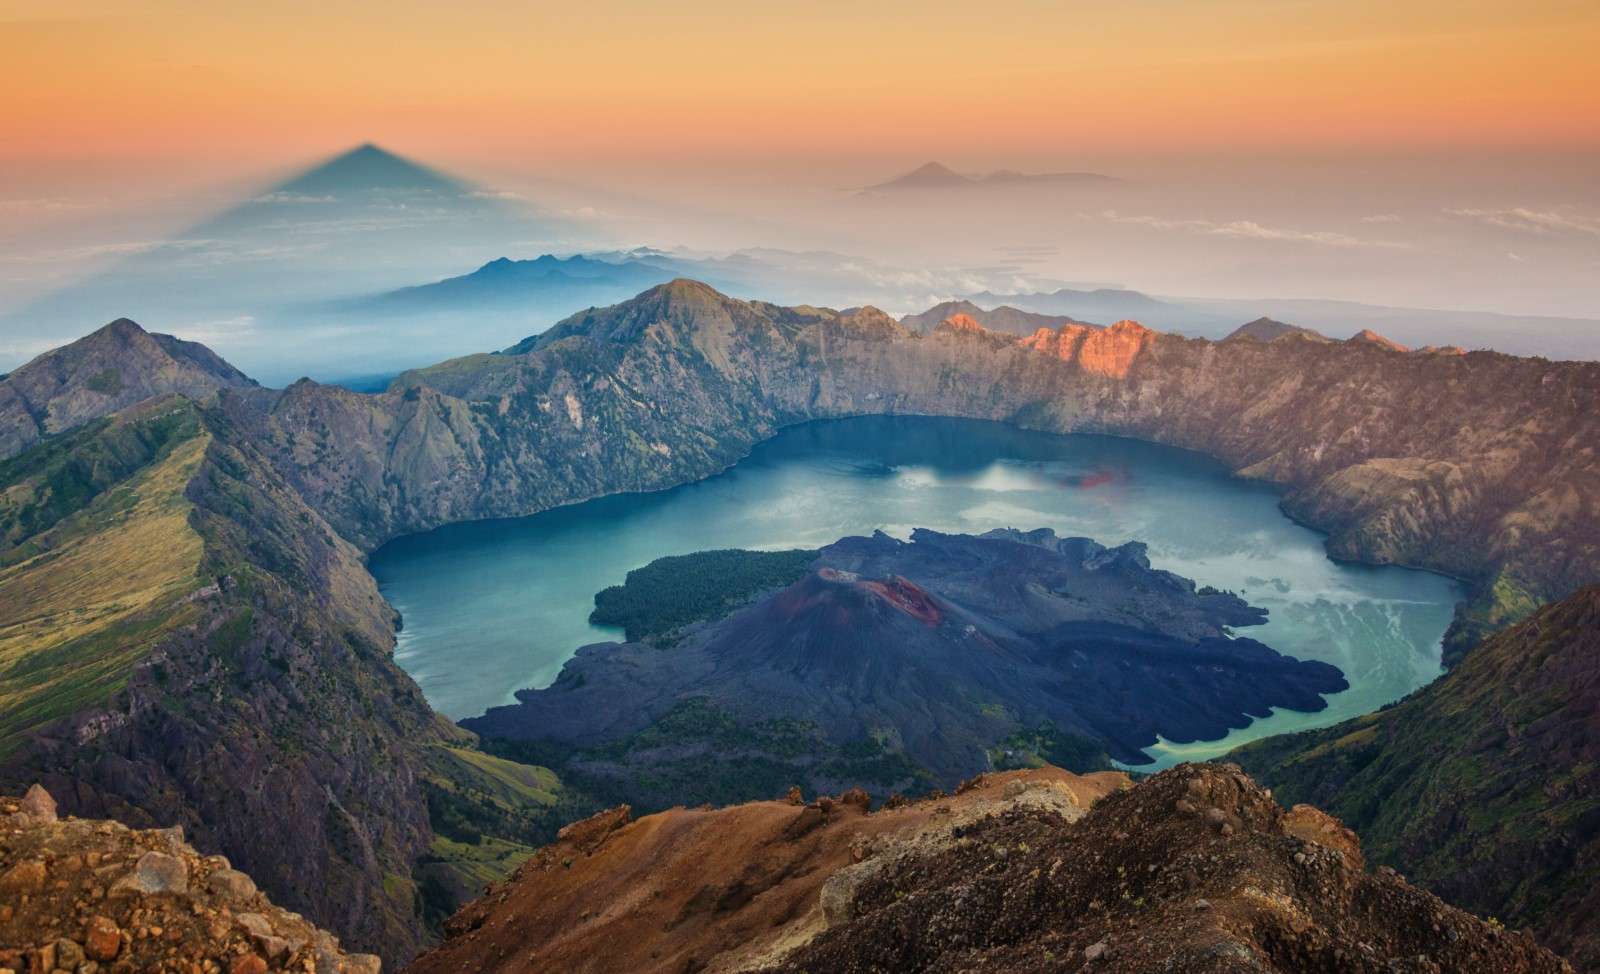 Mount Rinjani puzzle online from photo